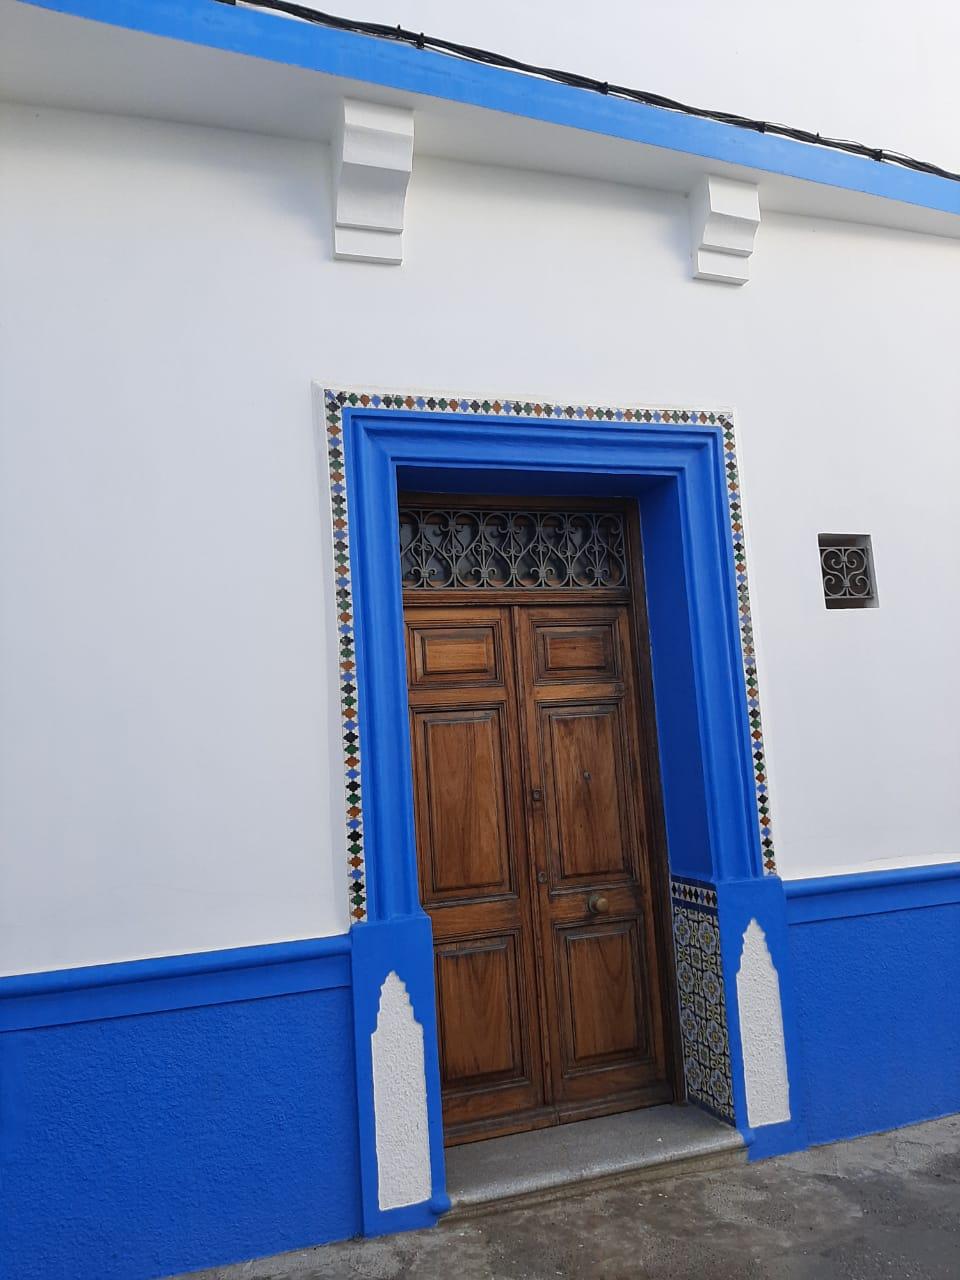 Gallery - Iconic door - Tour of Asilah